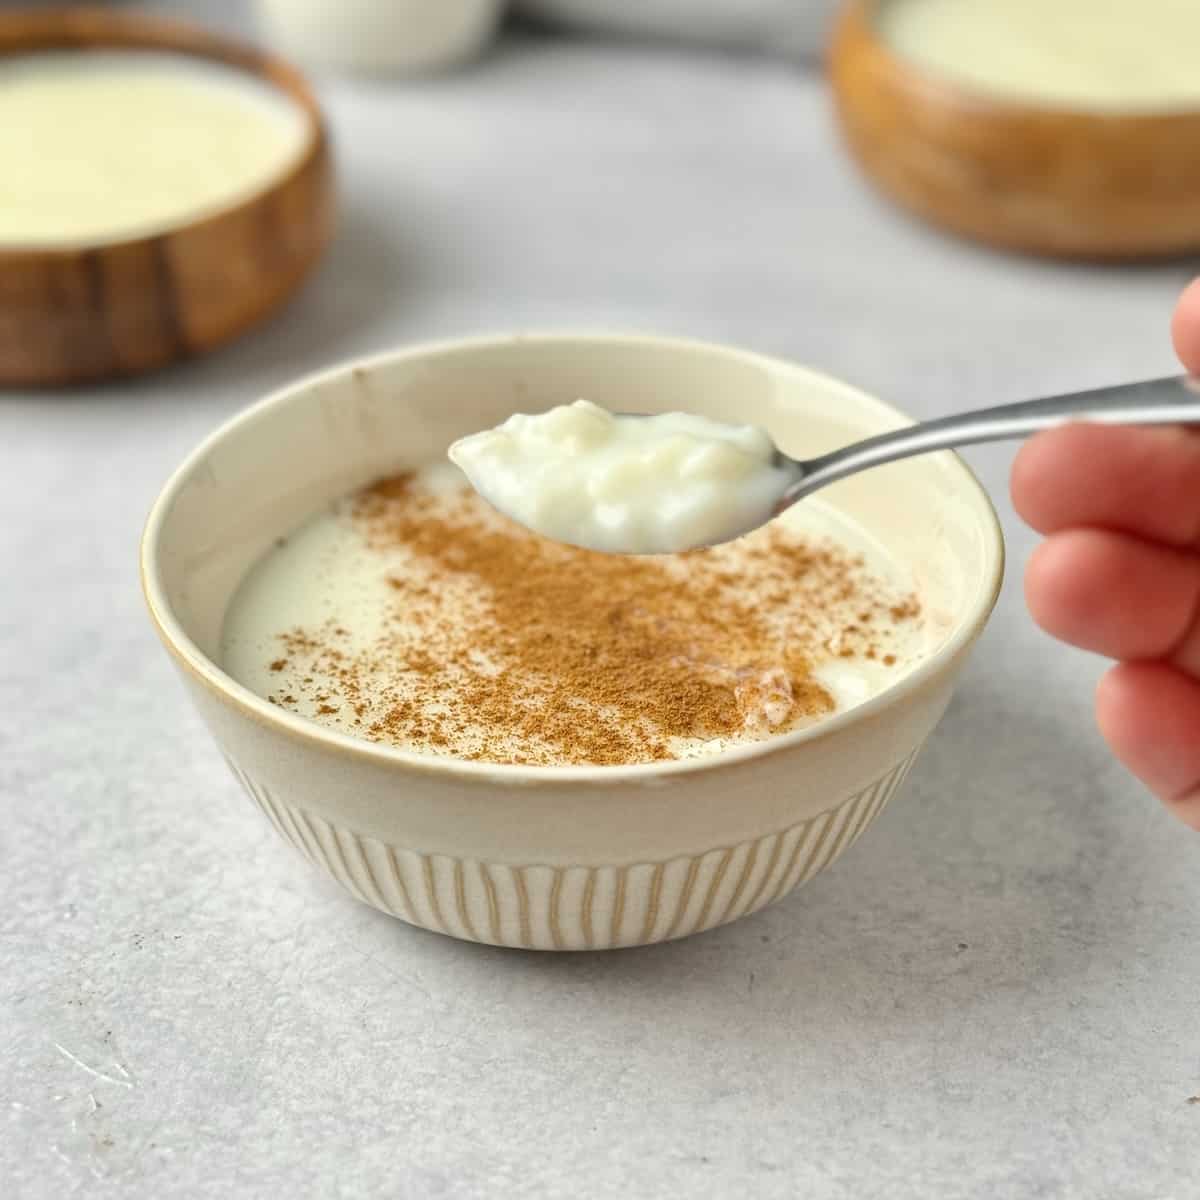 Rice pudding served in a bowl with cinnamon on top and a teaspoon full with rice pudding.